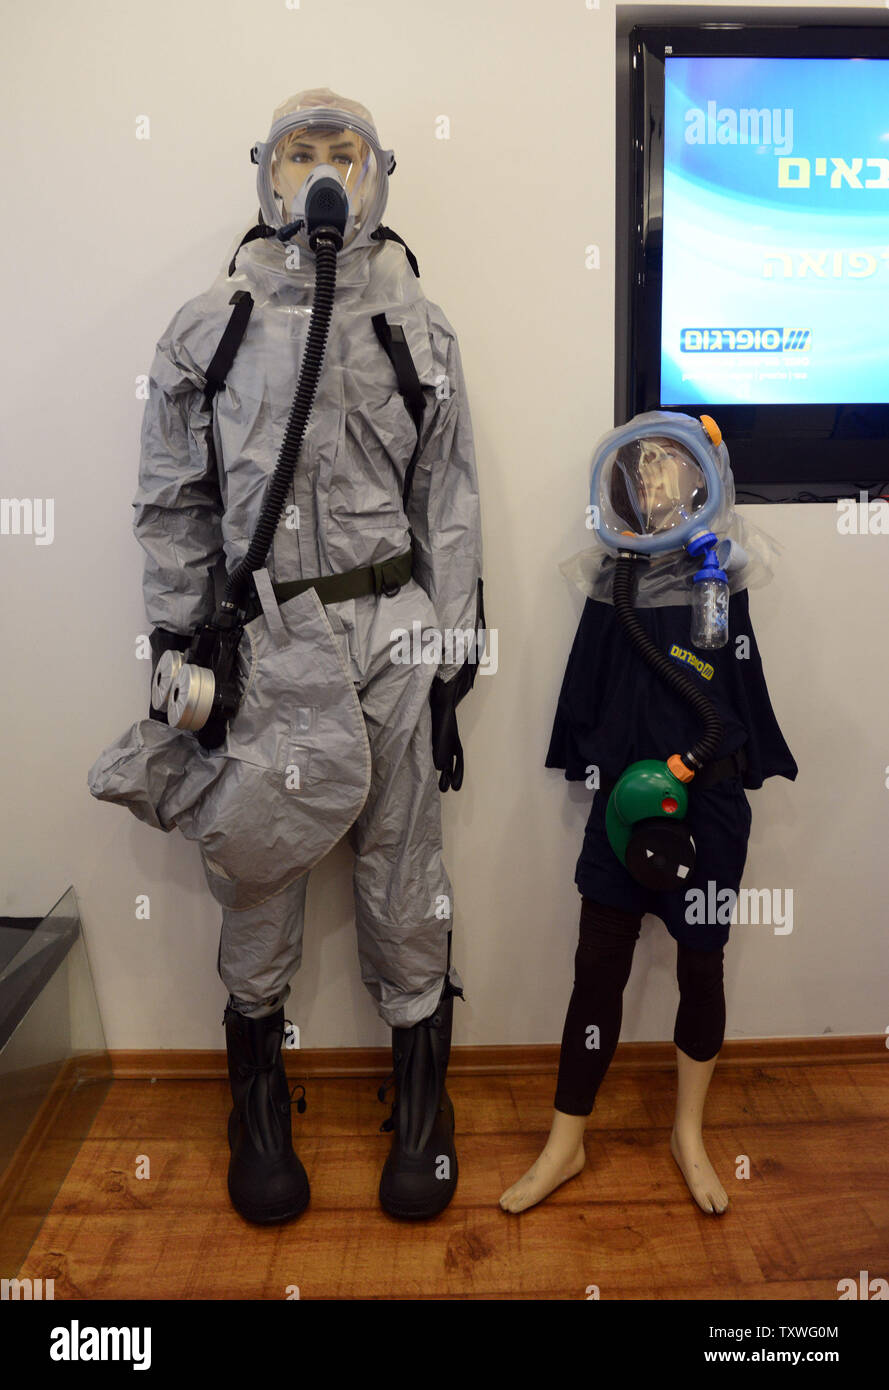 Mannequins wear gas masks and body suits for protection against chemical  and biological warfare in the Supergum Ltd. Factory in Tel Aviv, Israel,  May 7, 2013. There has been increased interest in